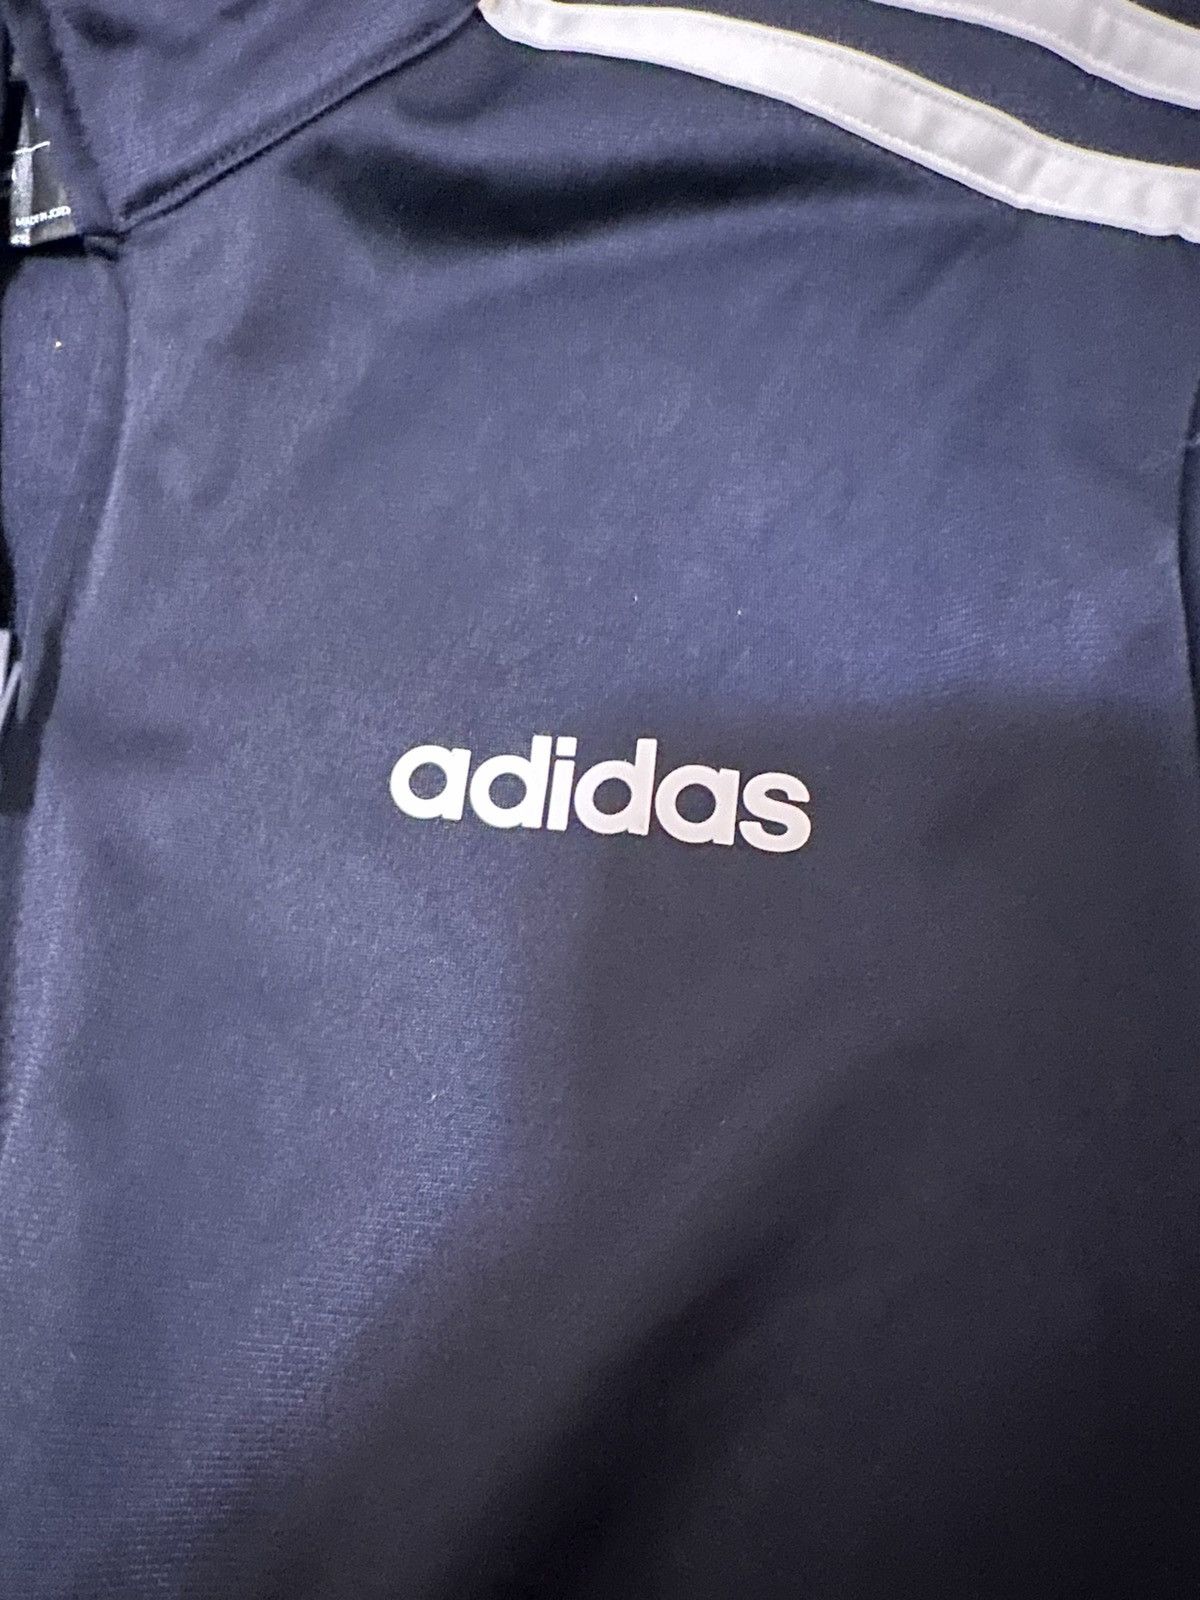 Adidas adidas navy track jacket Size US S / EU 44-46 / 1 - 2 Preview